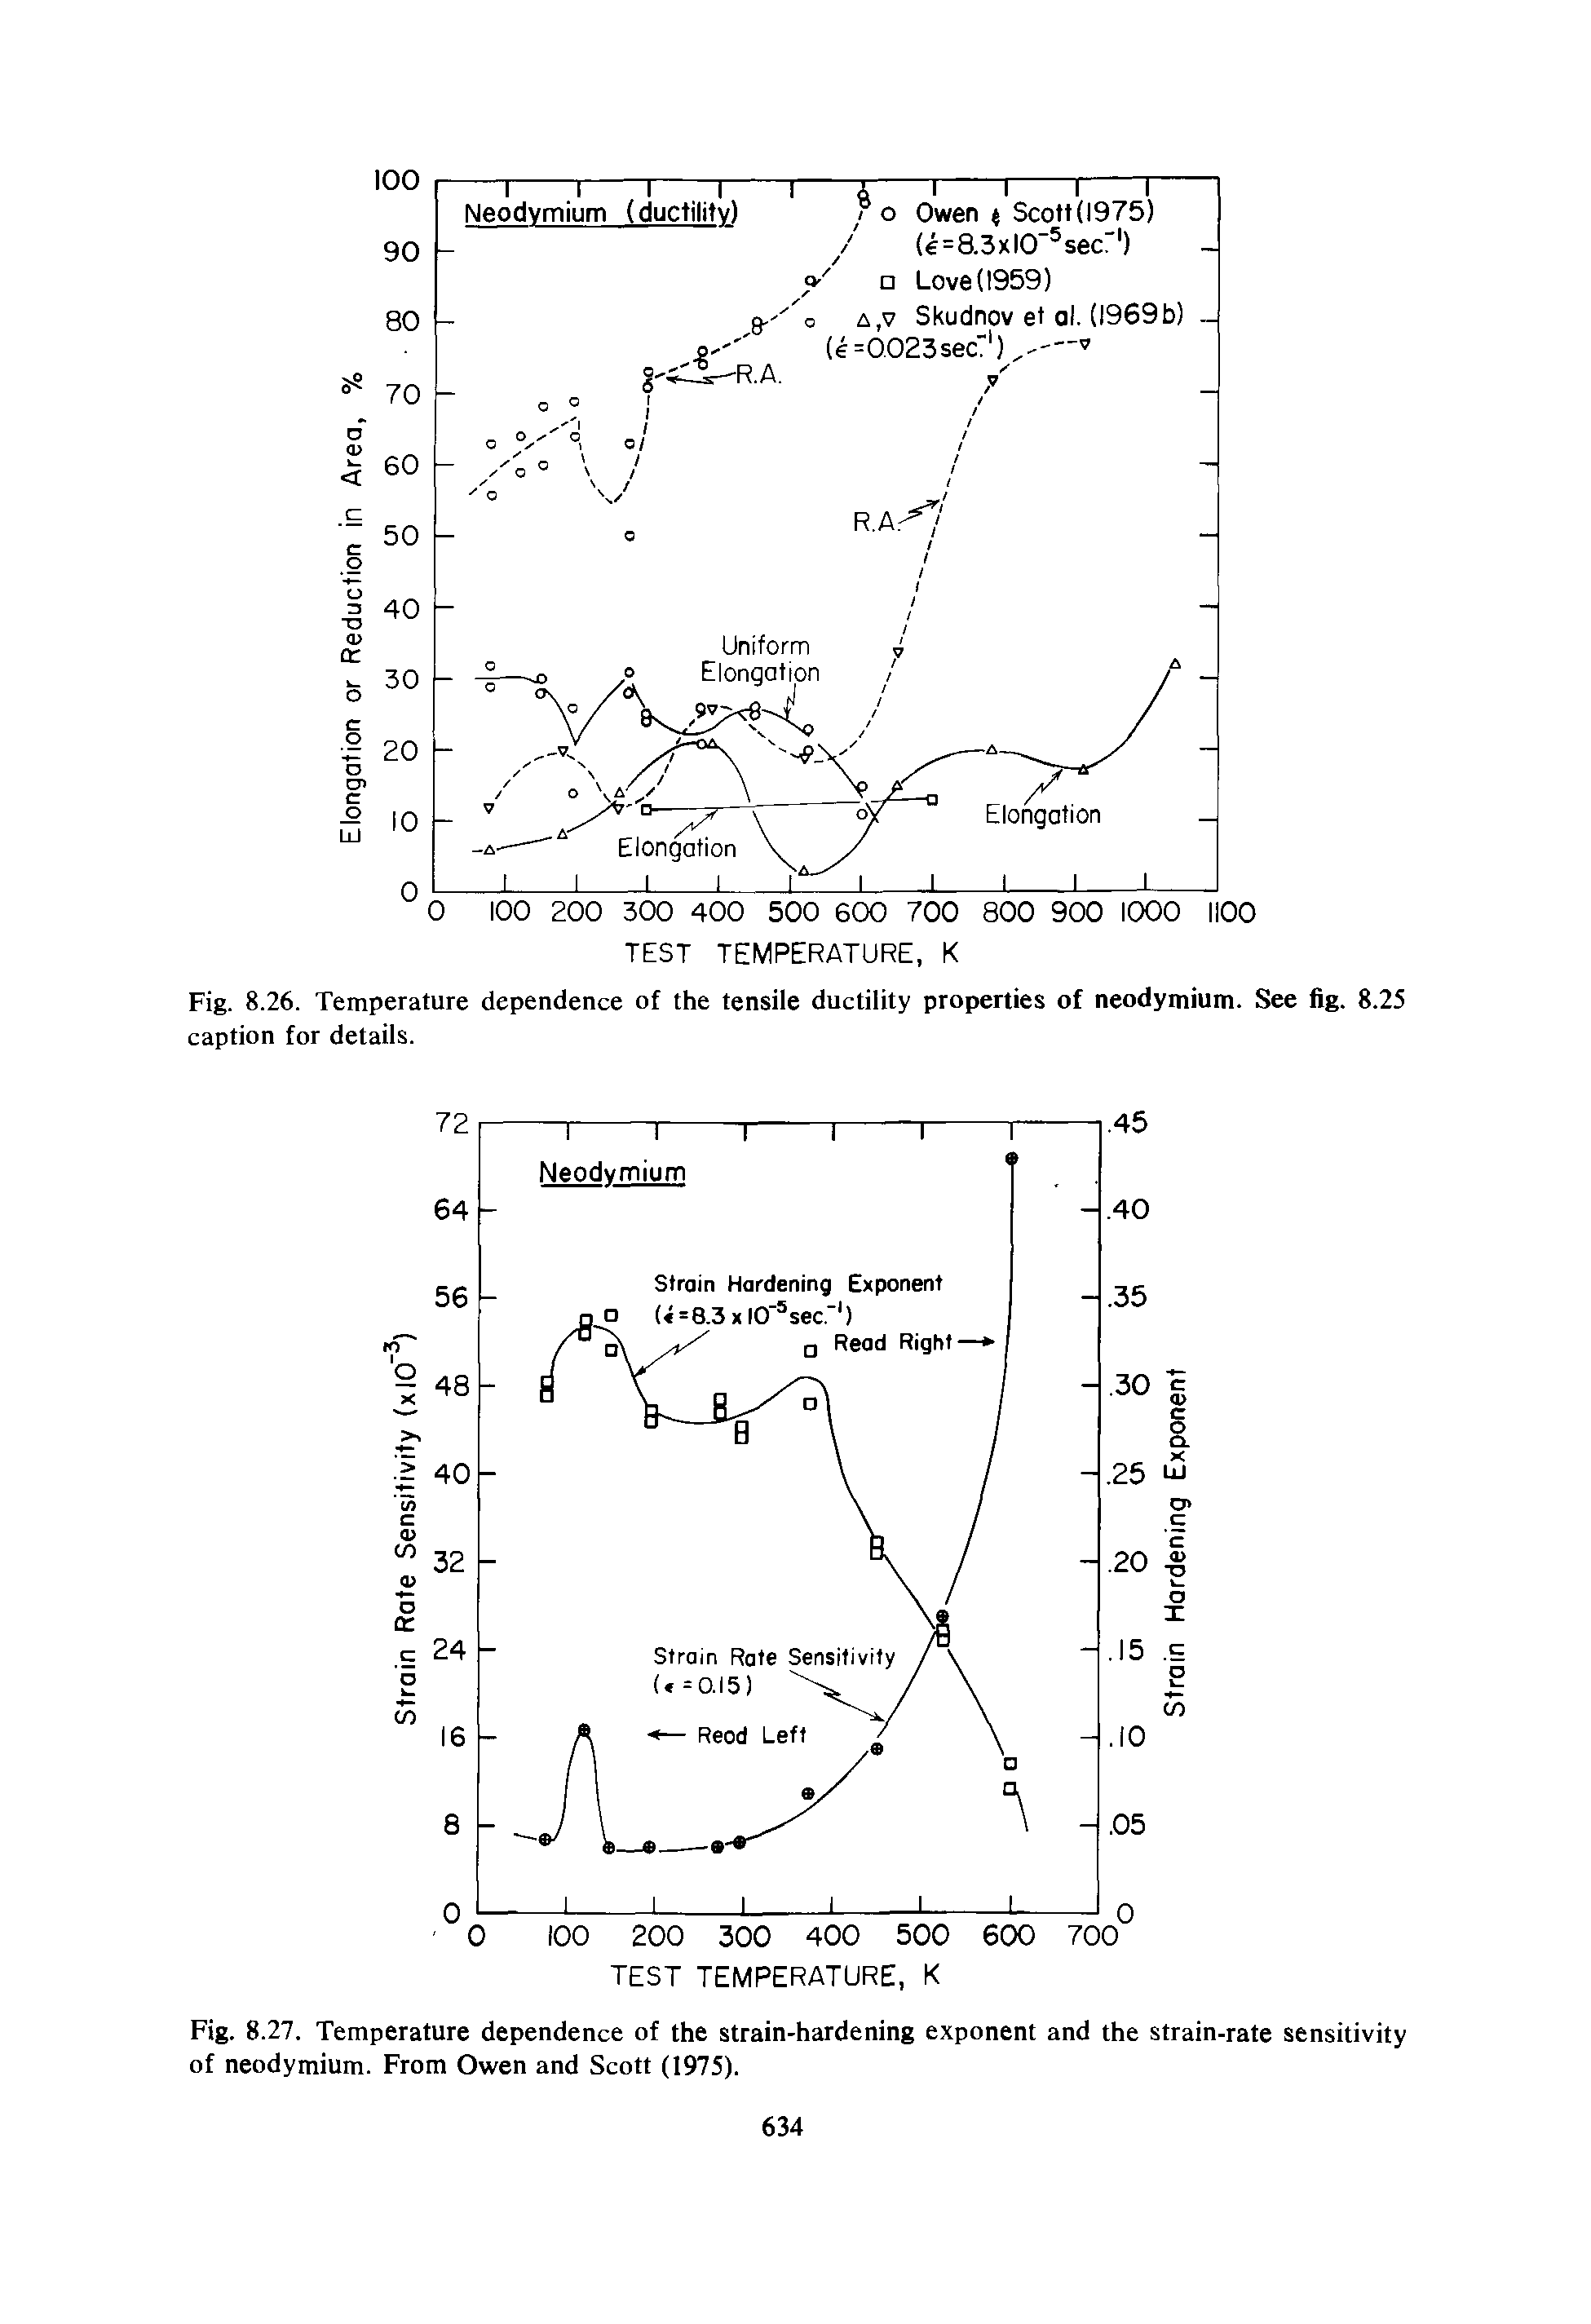 Fig. 8.27. Temperature dependence of the strain-hardening exponent and the strain-rate sensitivity of neodymium. From Owen and Scott (1975).